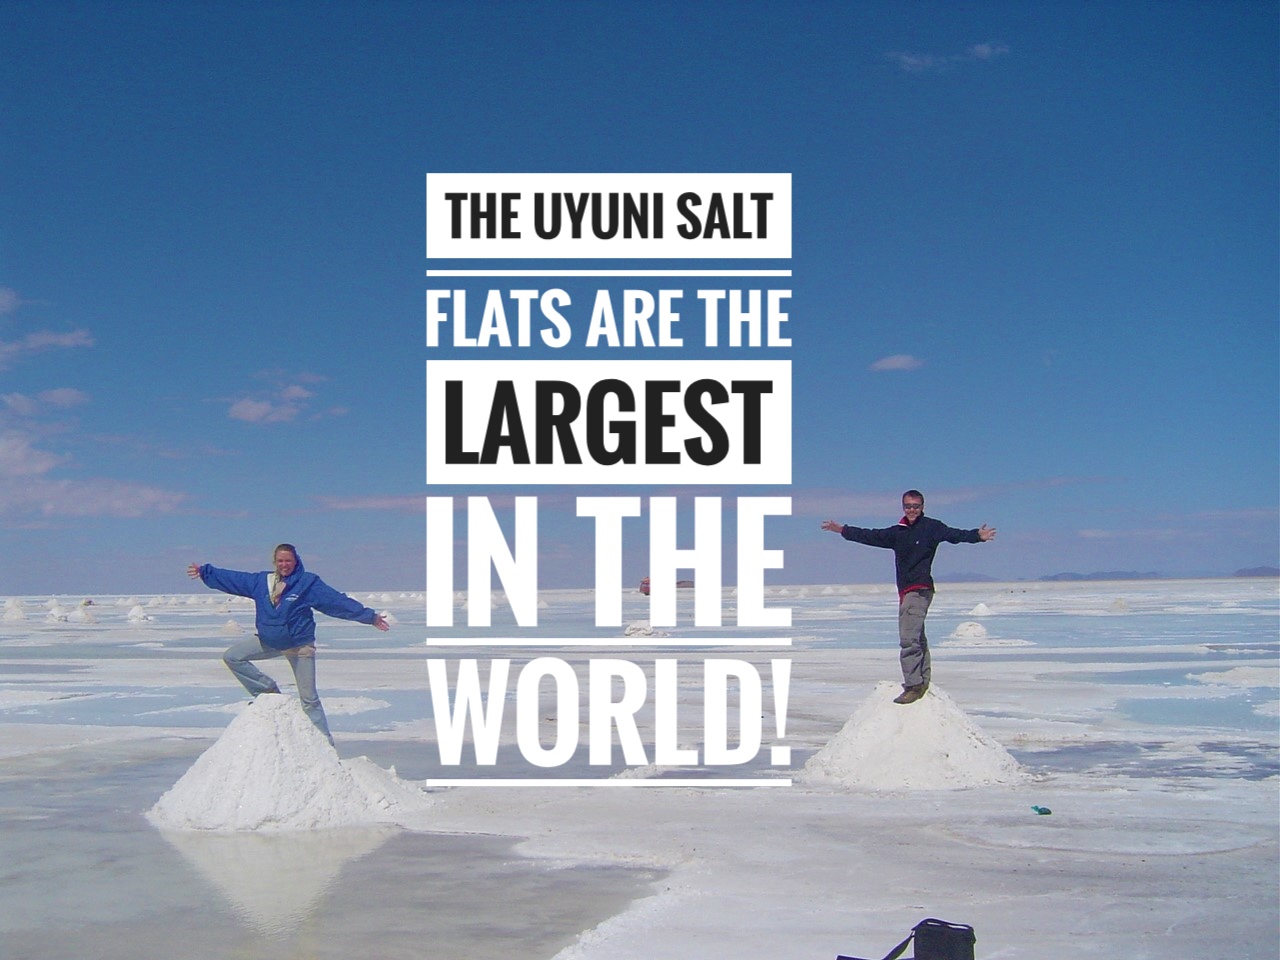 The Uyuni Salt Flats are the Largest in the World!